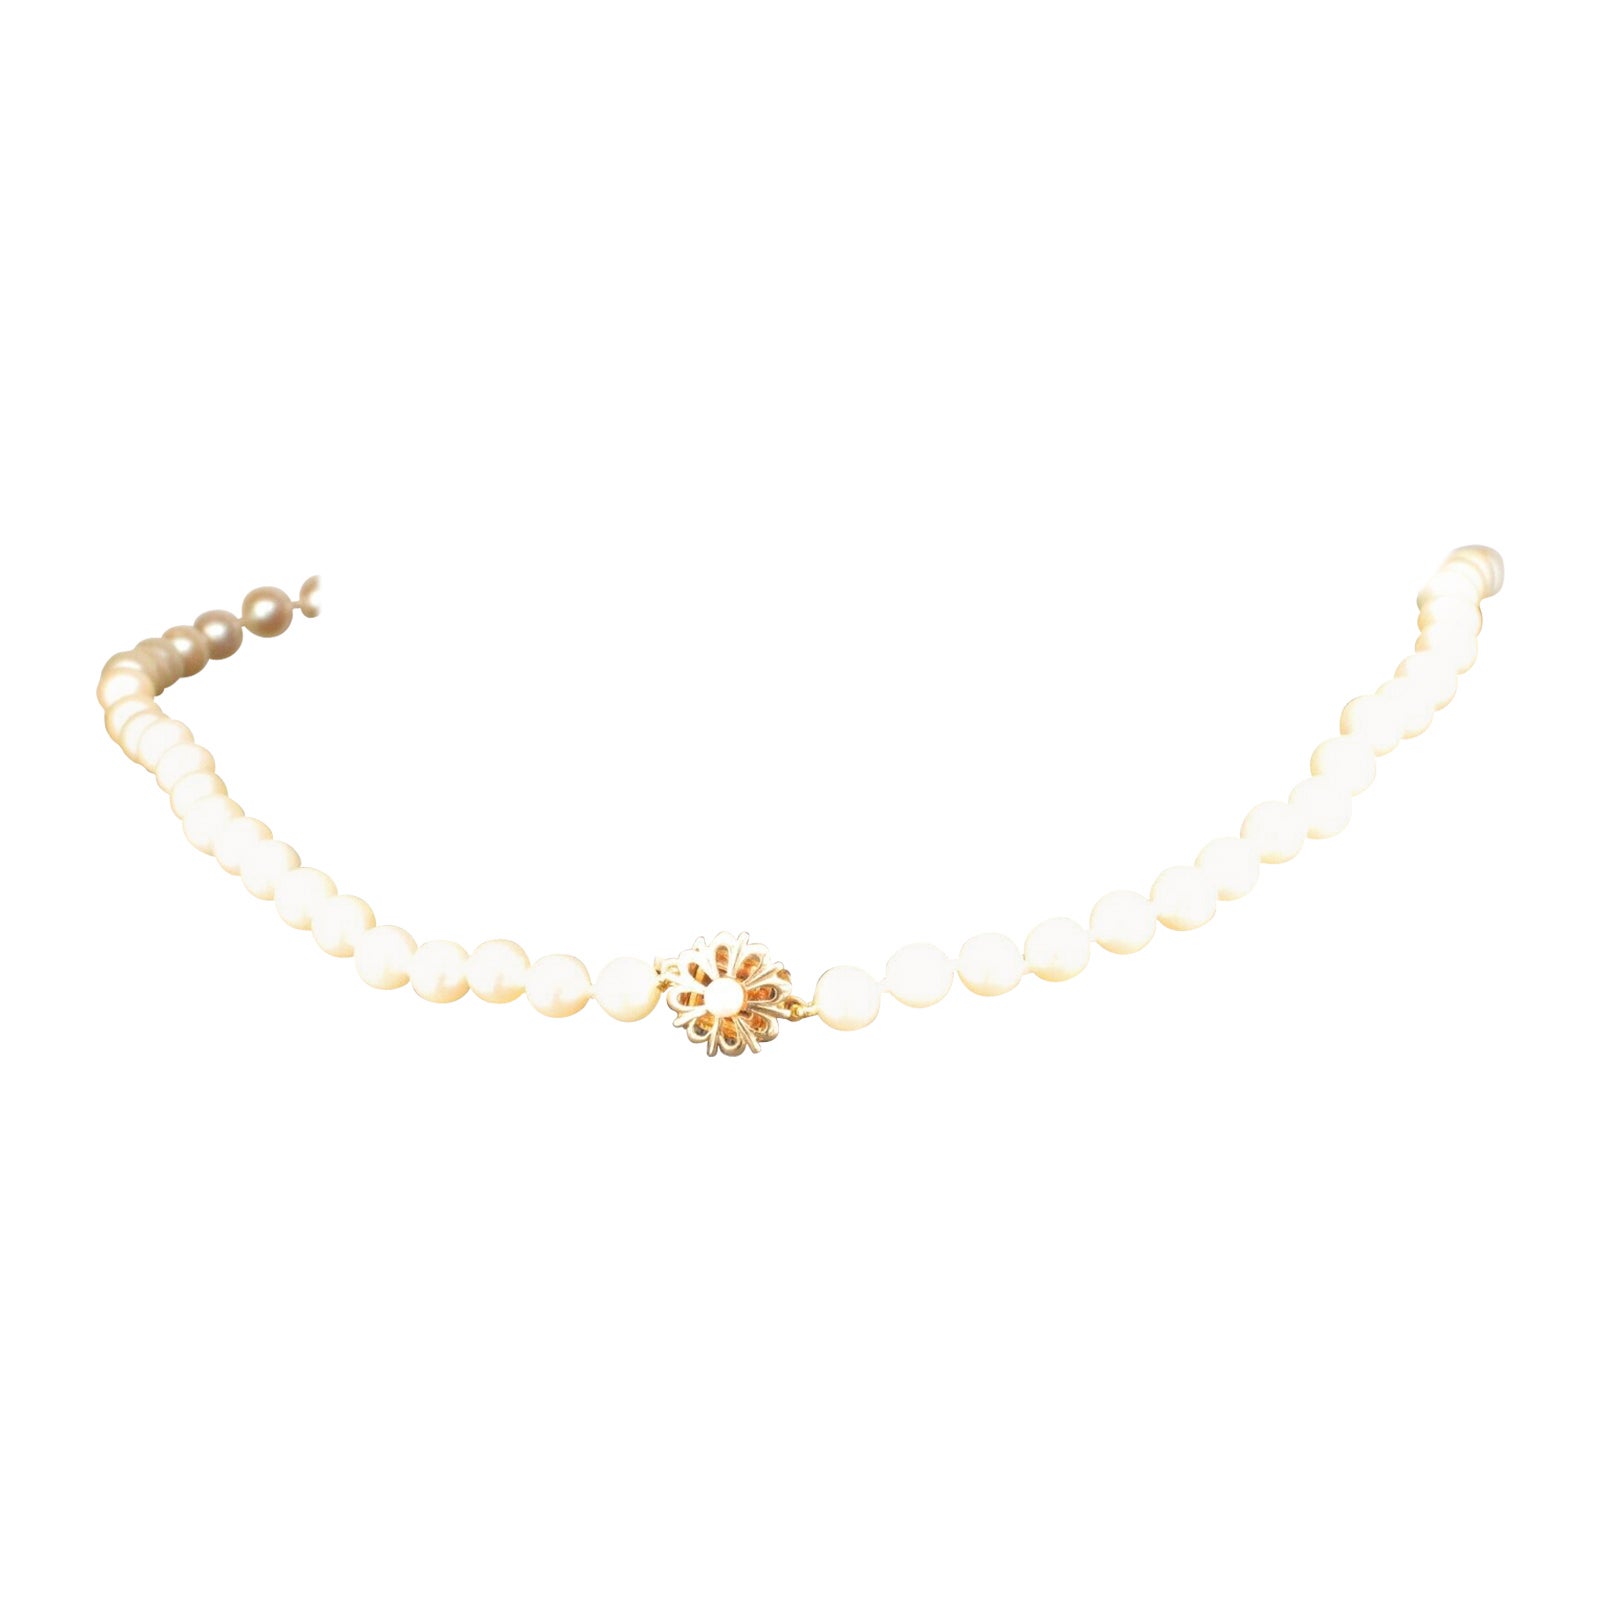 Cultured Pearl Necklace with Very Pretty 9ct Yellow Gold & Pearl Clasp